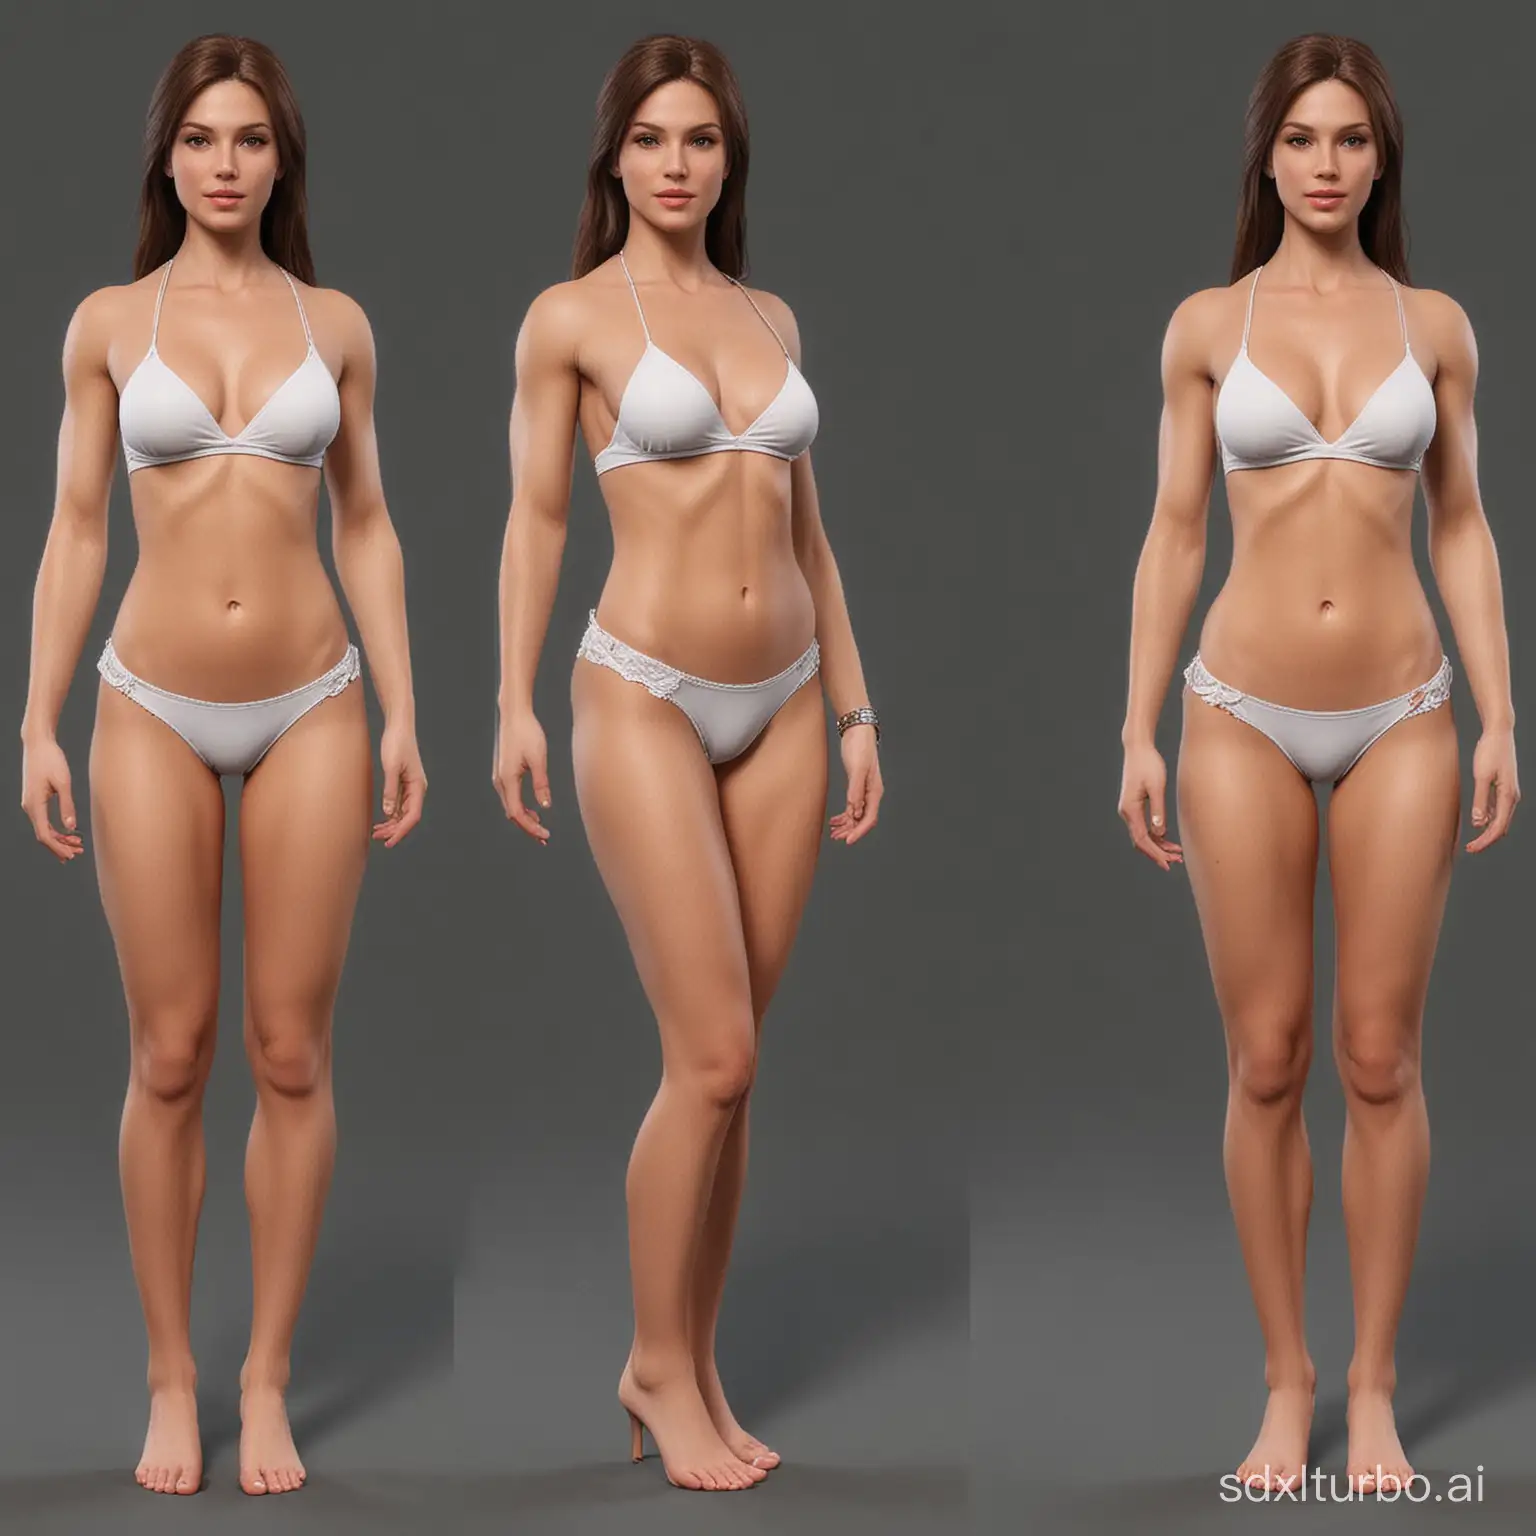 "UPGRADE CREATING A CUSTOM MODEL IS LIMITED TO PRO USERS. EACH MODEL female"